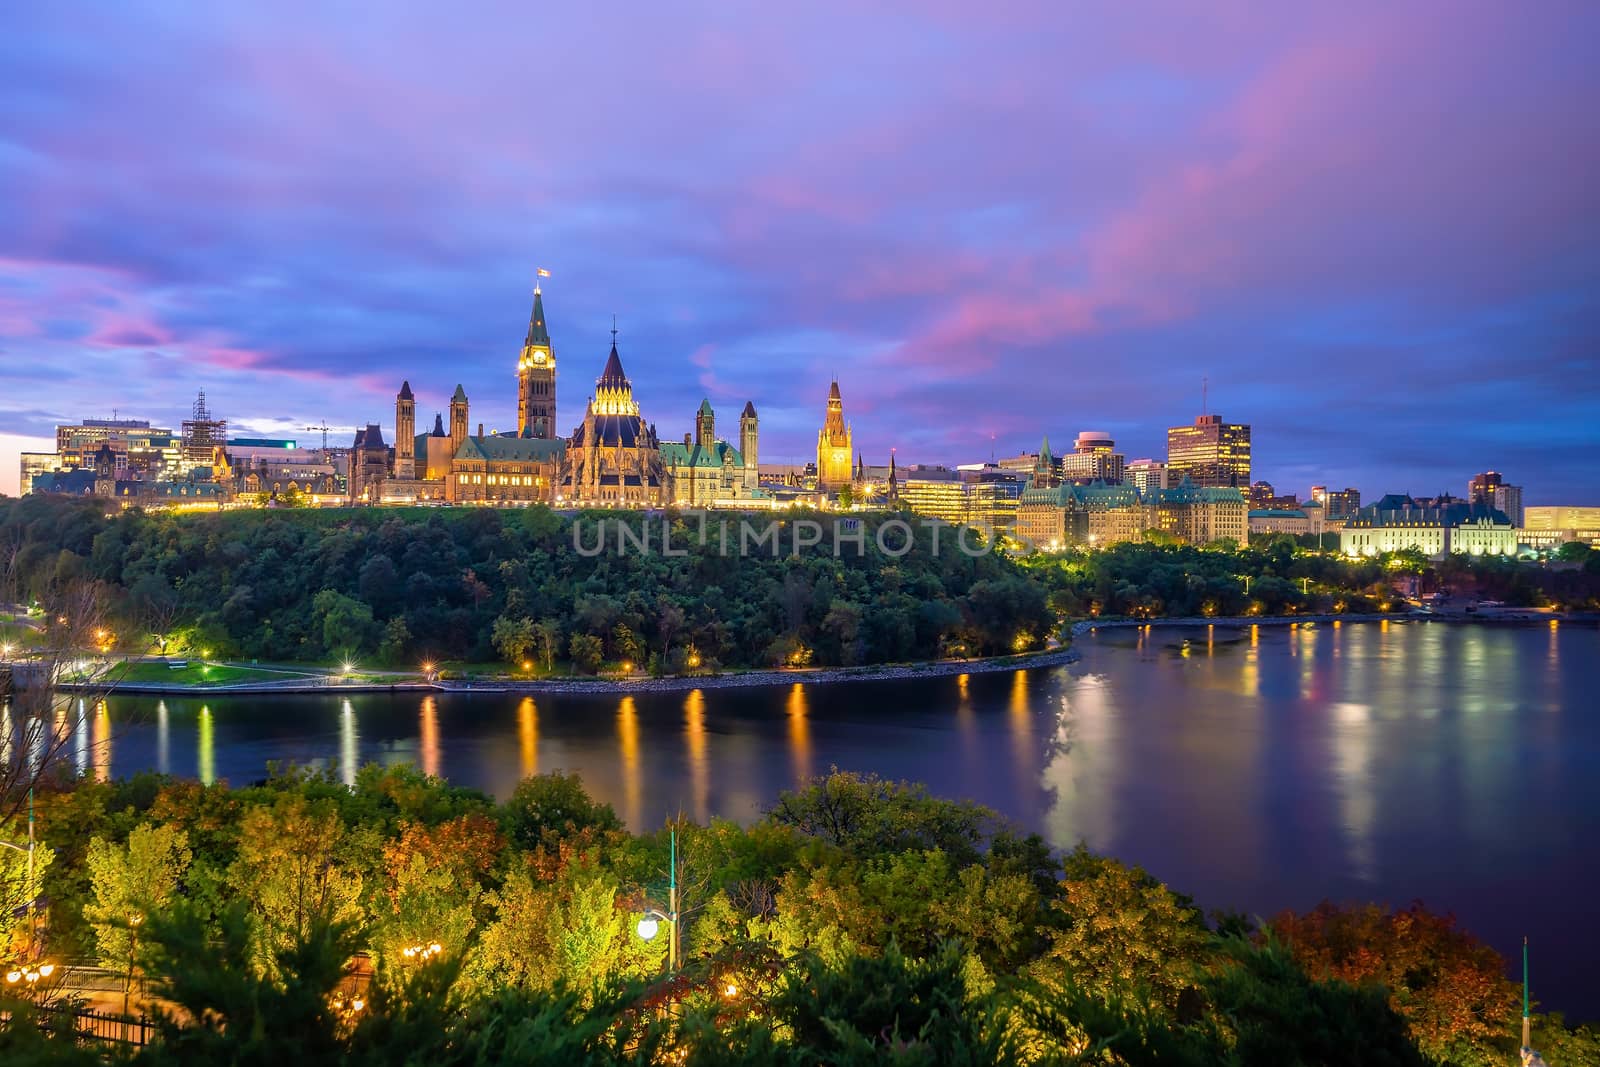 Parliament Hill in Ottawa, Ontario, Canada by f11photo